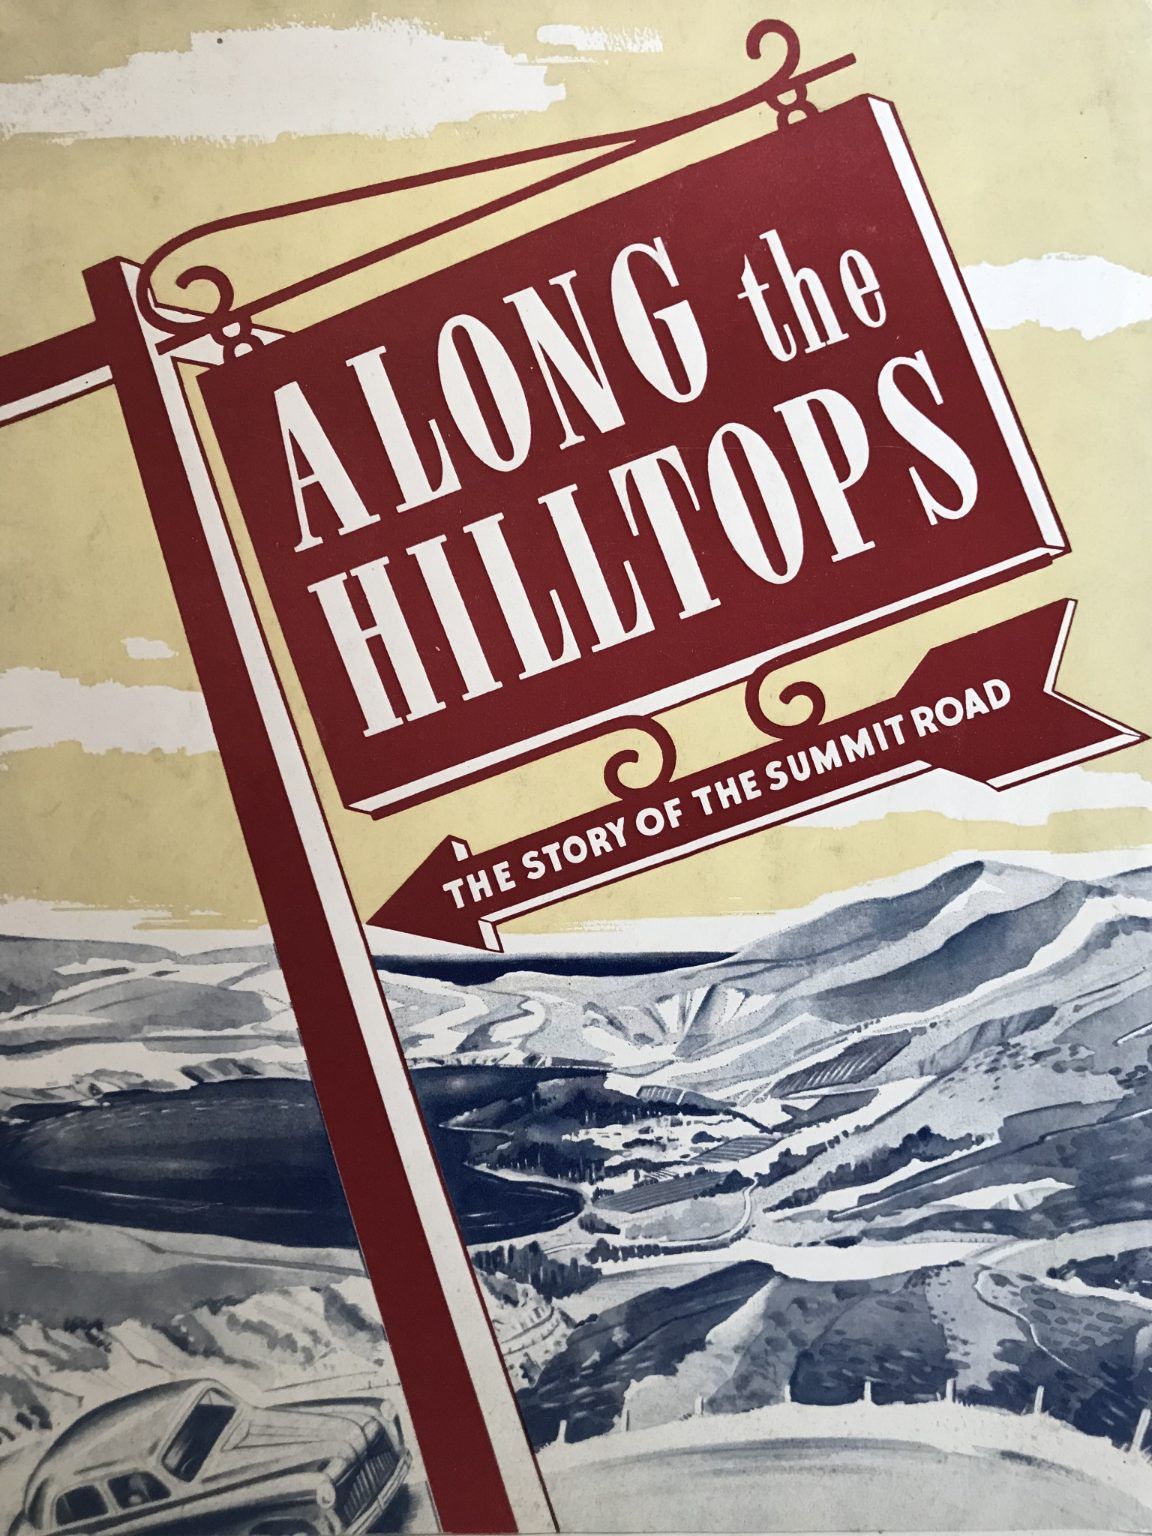 ALONG THE HILLTOPS: The Story of The Summit Road